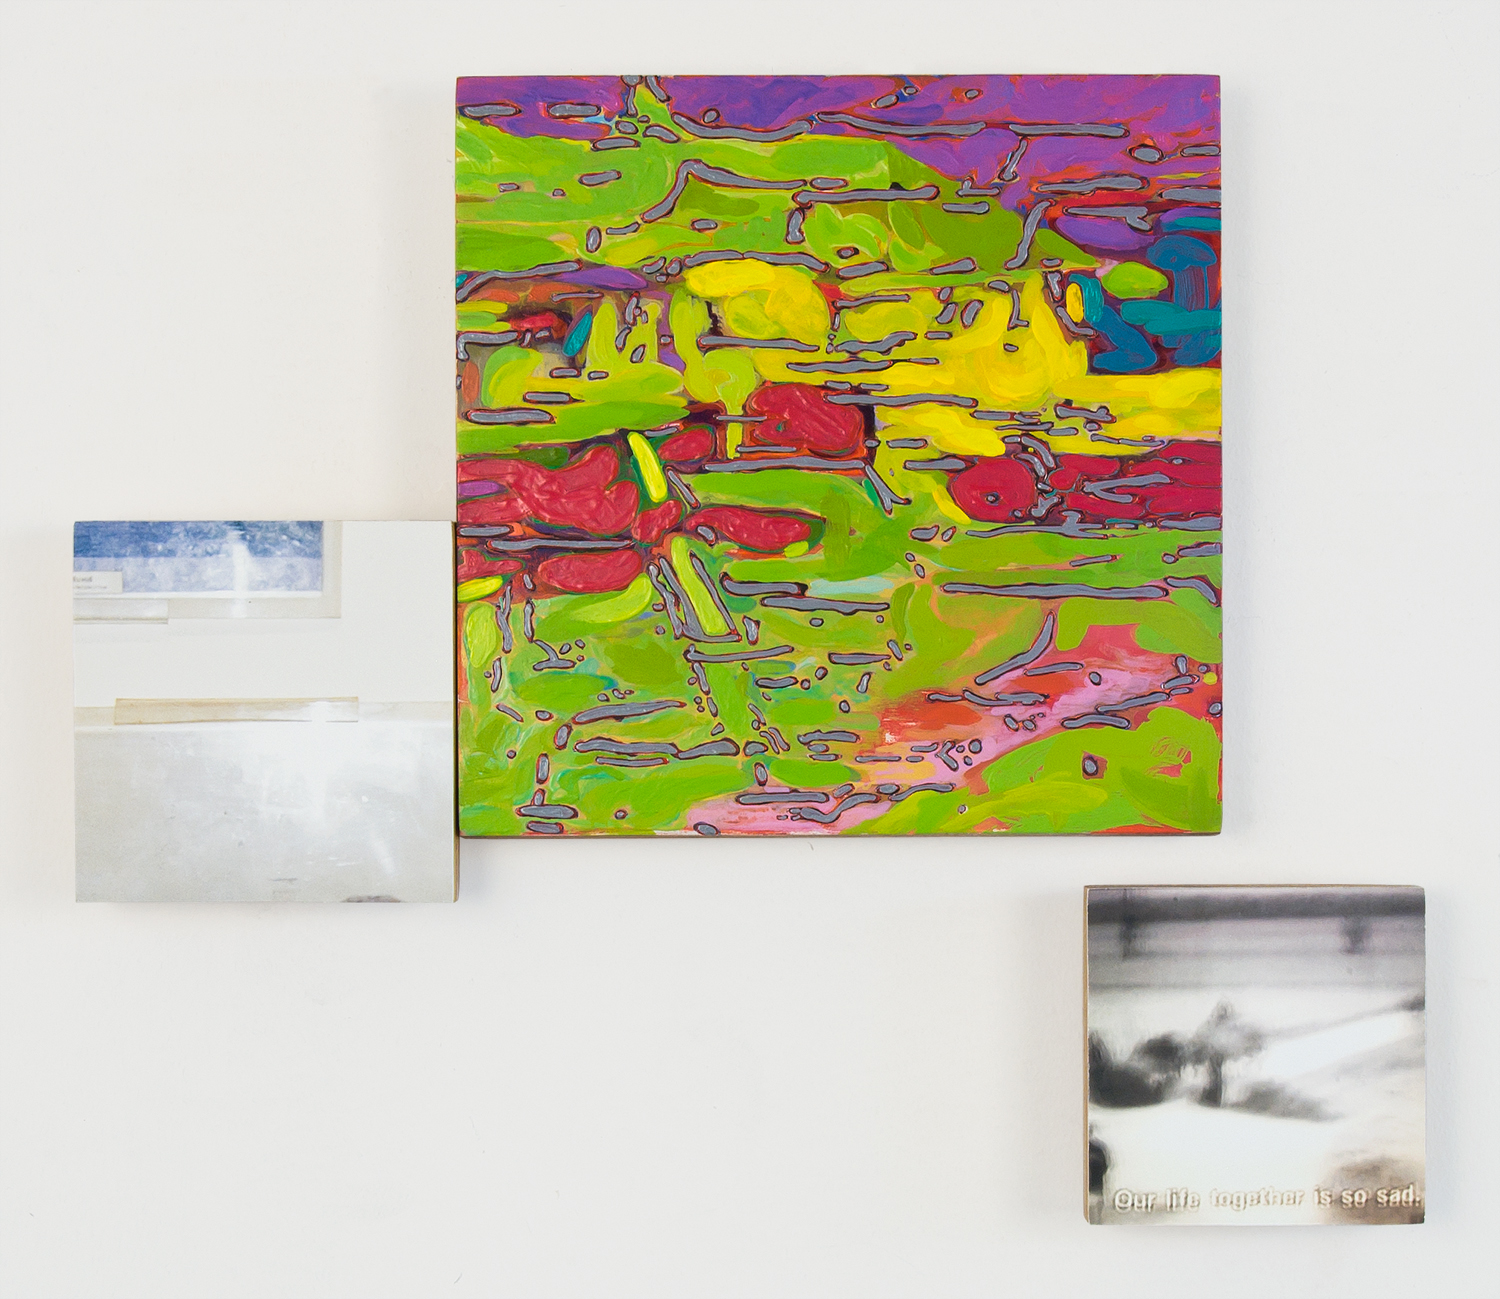   Our life together  , 2010,&nbsp;  oil and archival inkjet prints on 3 panels&nbsp;  dimensions variable  